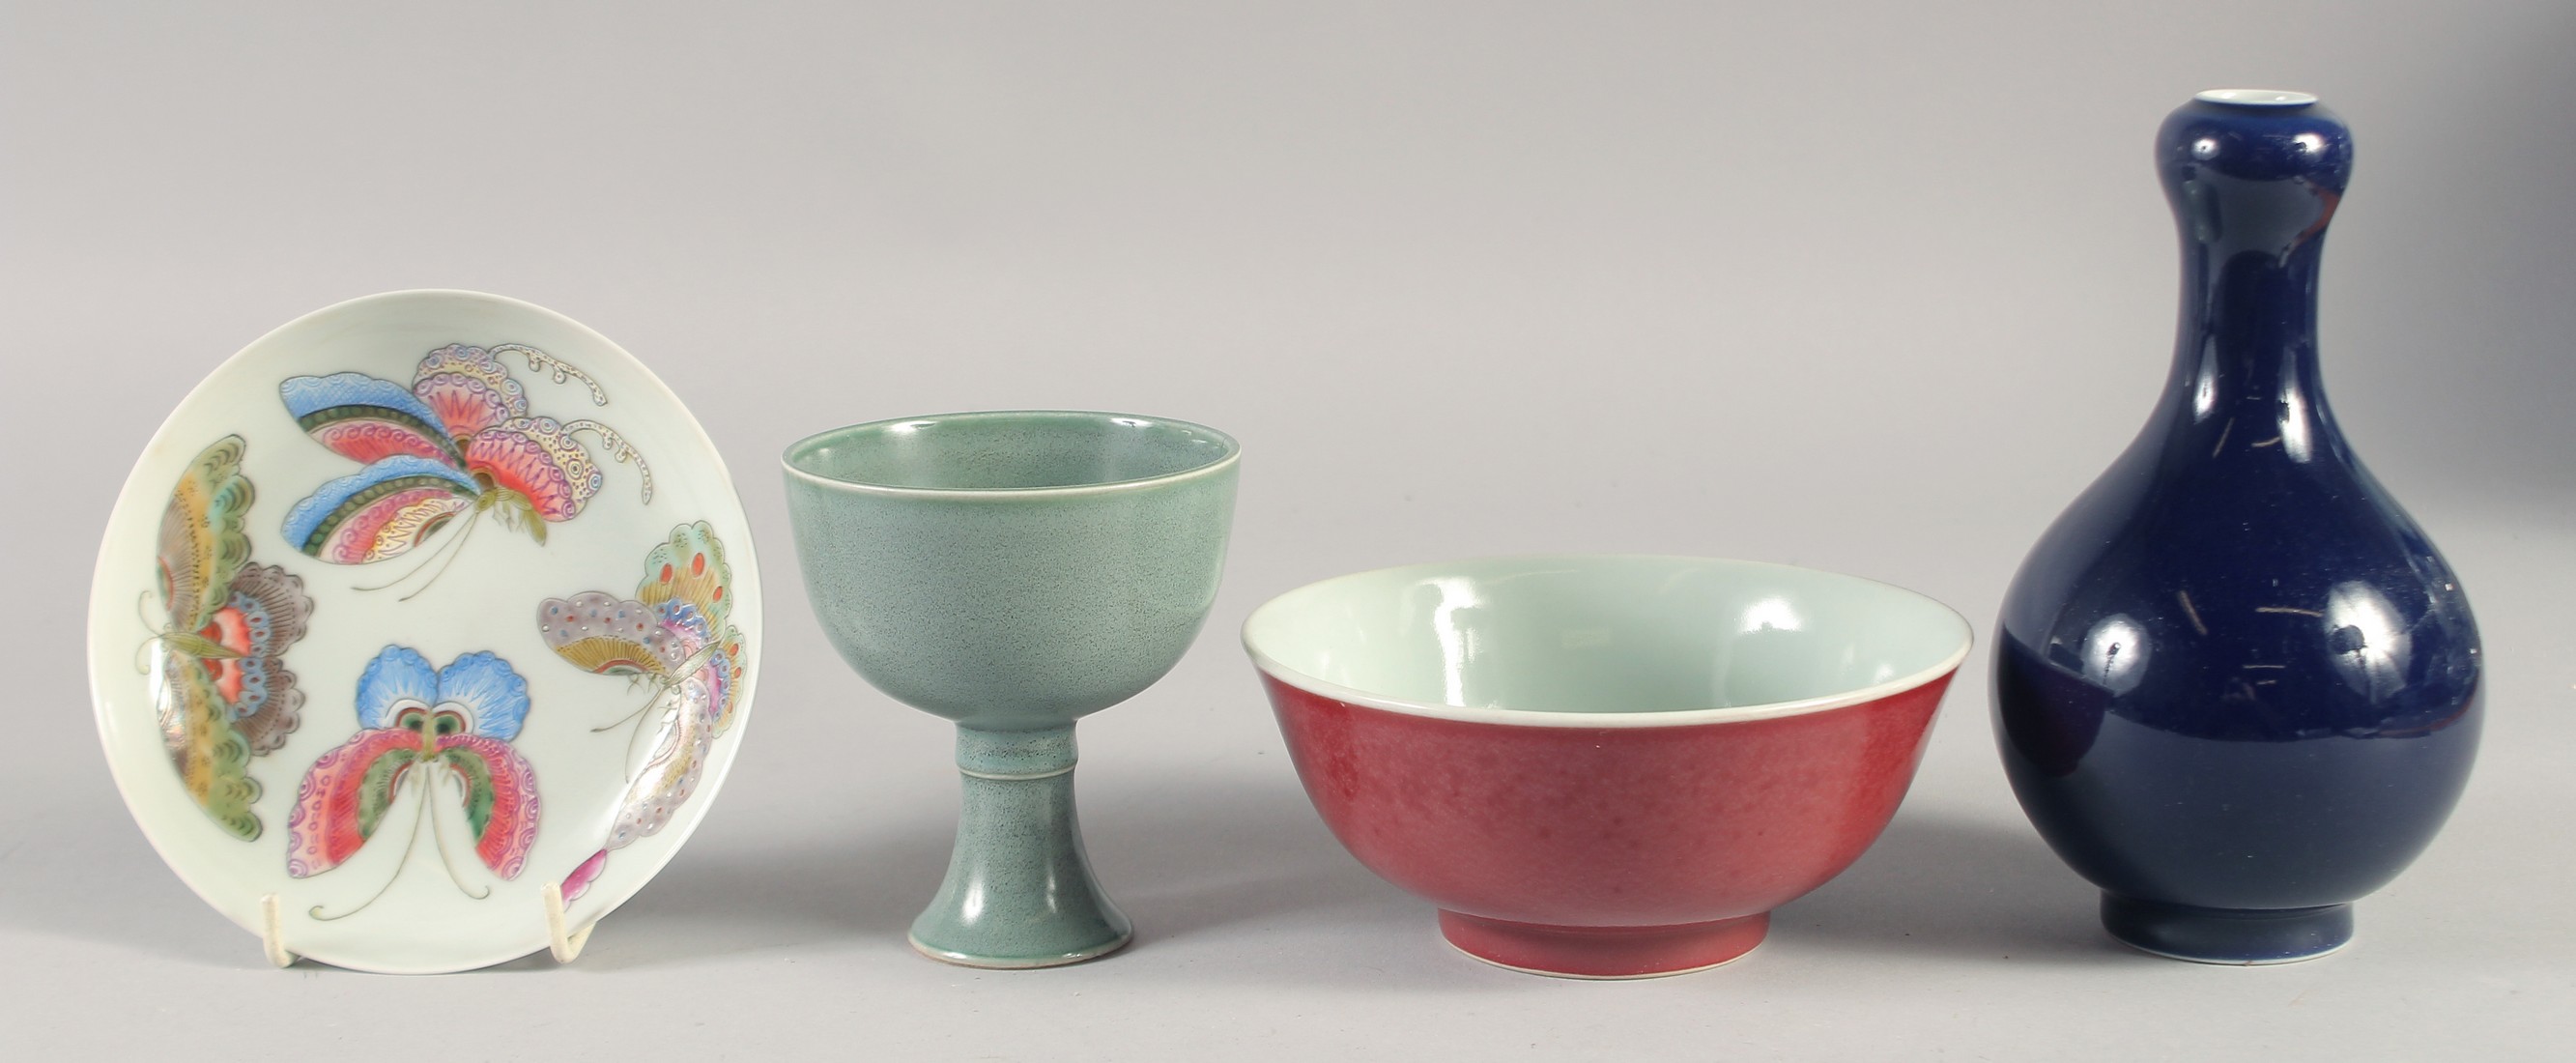 A COLLECTION OF FOUR CHINESE PORCELAIN ITEMS, comprising a vase, a cup, a bowl and a dish, (4).